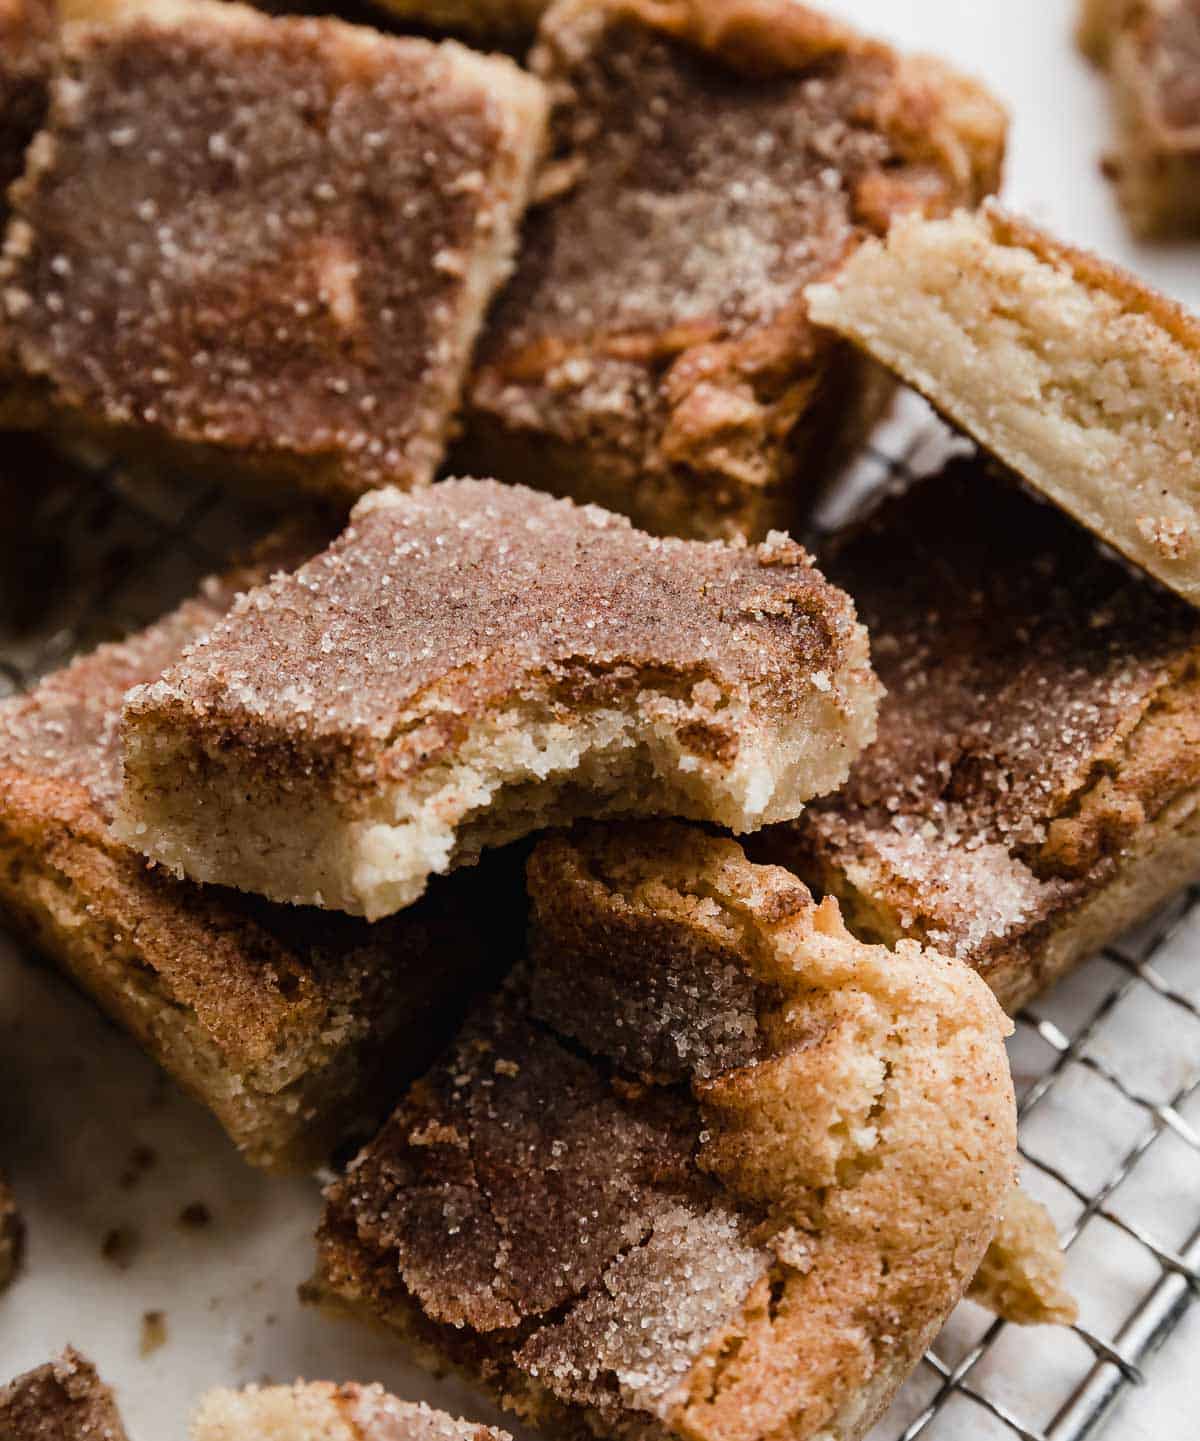 A Snickerdoodle Bar with a bite taken out of it.